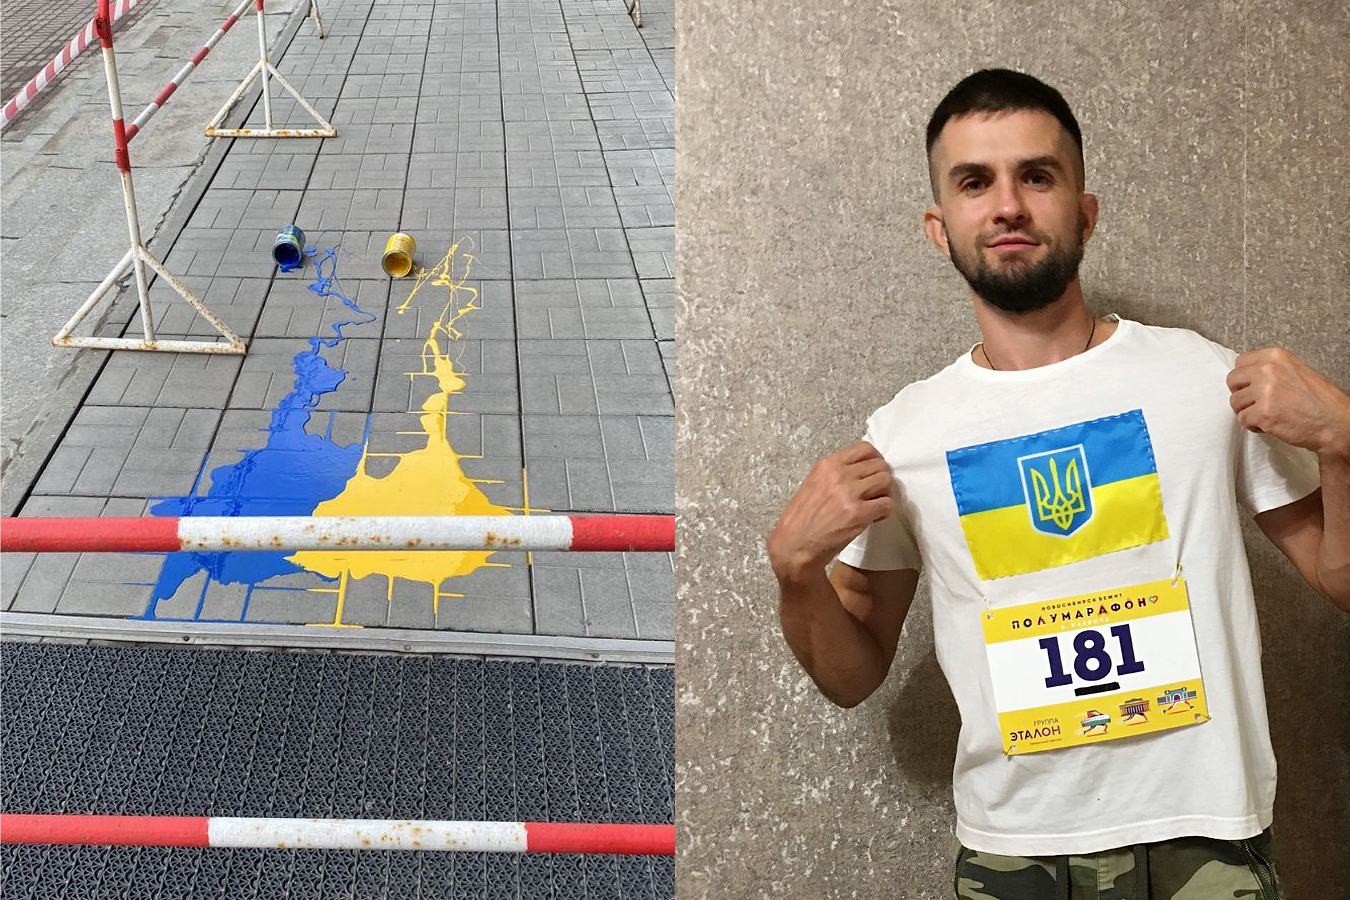 Stanislav Karzanov was fined 93 thousand rubles for dousing the entrance to the mayor’s office of Novosibirsk with paint. Andriy Korolchuk, prosecuted under an administrative case on the basis of «discrediting the military”—running in a T-shirt with the Ukrainian flag. The case was promptly dismissed / Photo: Telegram channel of Anatoliy Lokot and Andriy Korolchuk